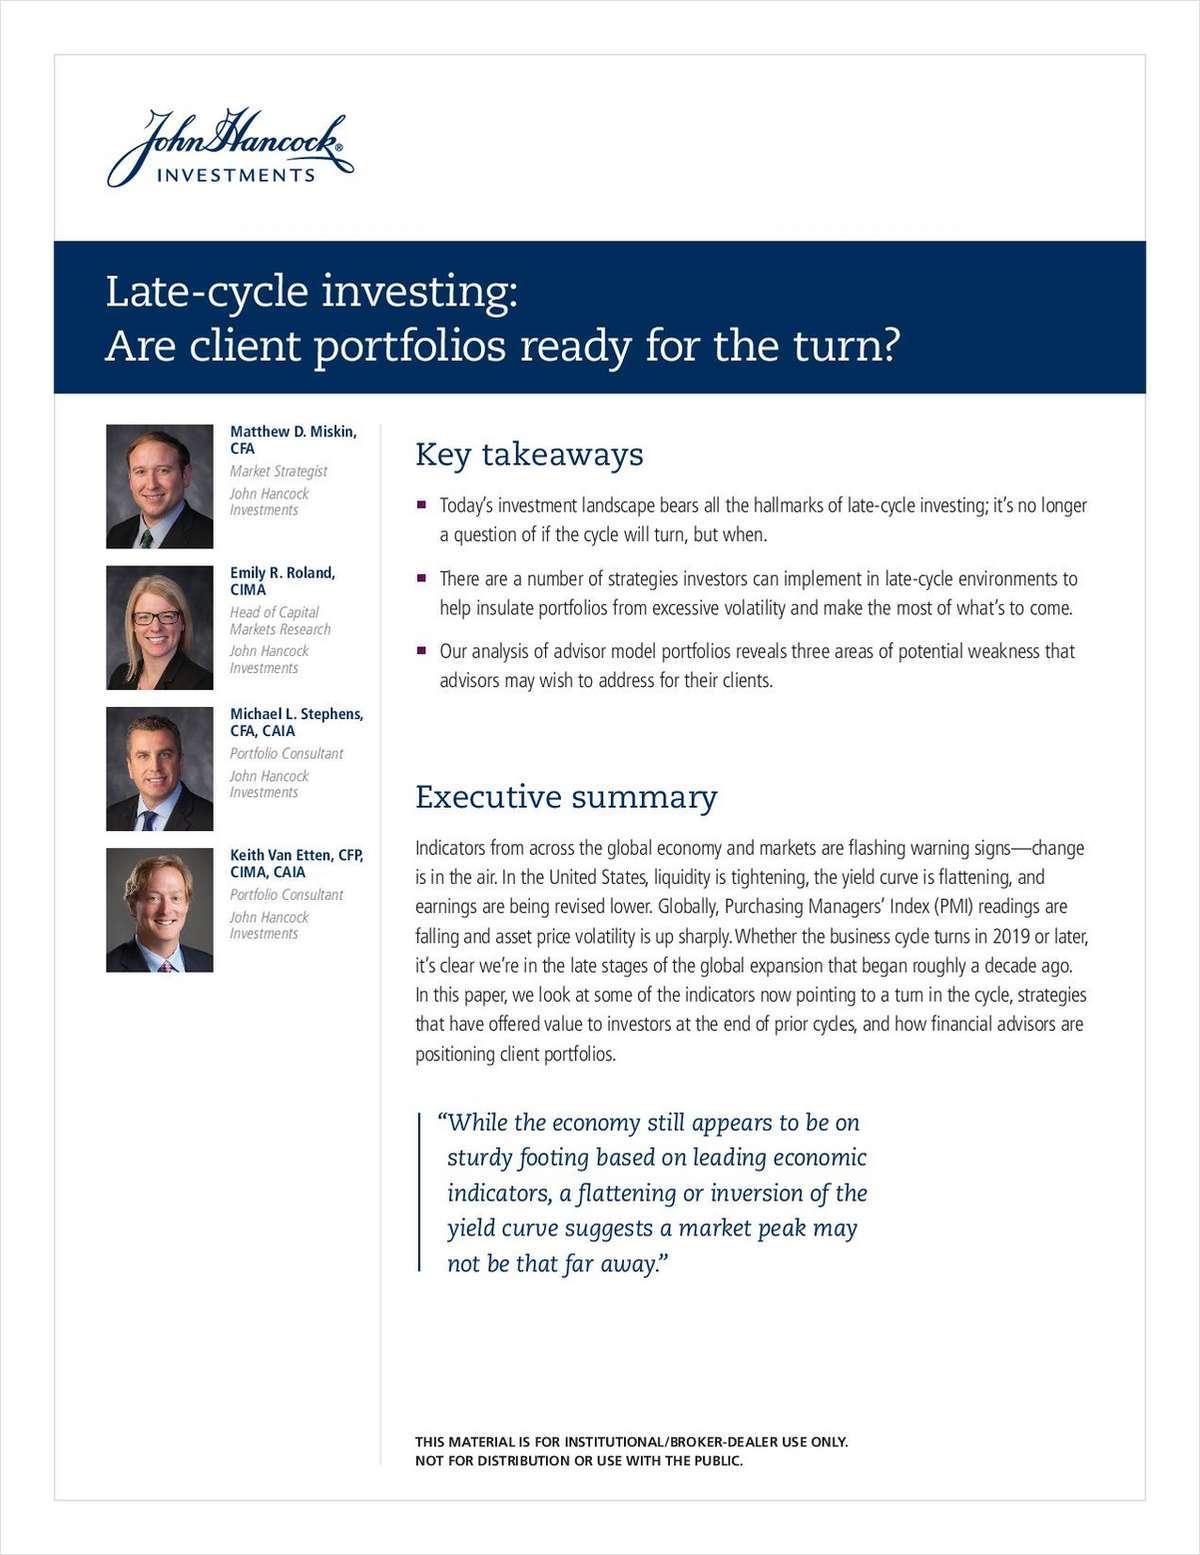 Late-Cycle Investing: Are Client Portfolios Ready For The Turn?